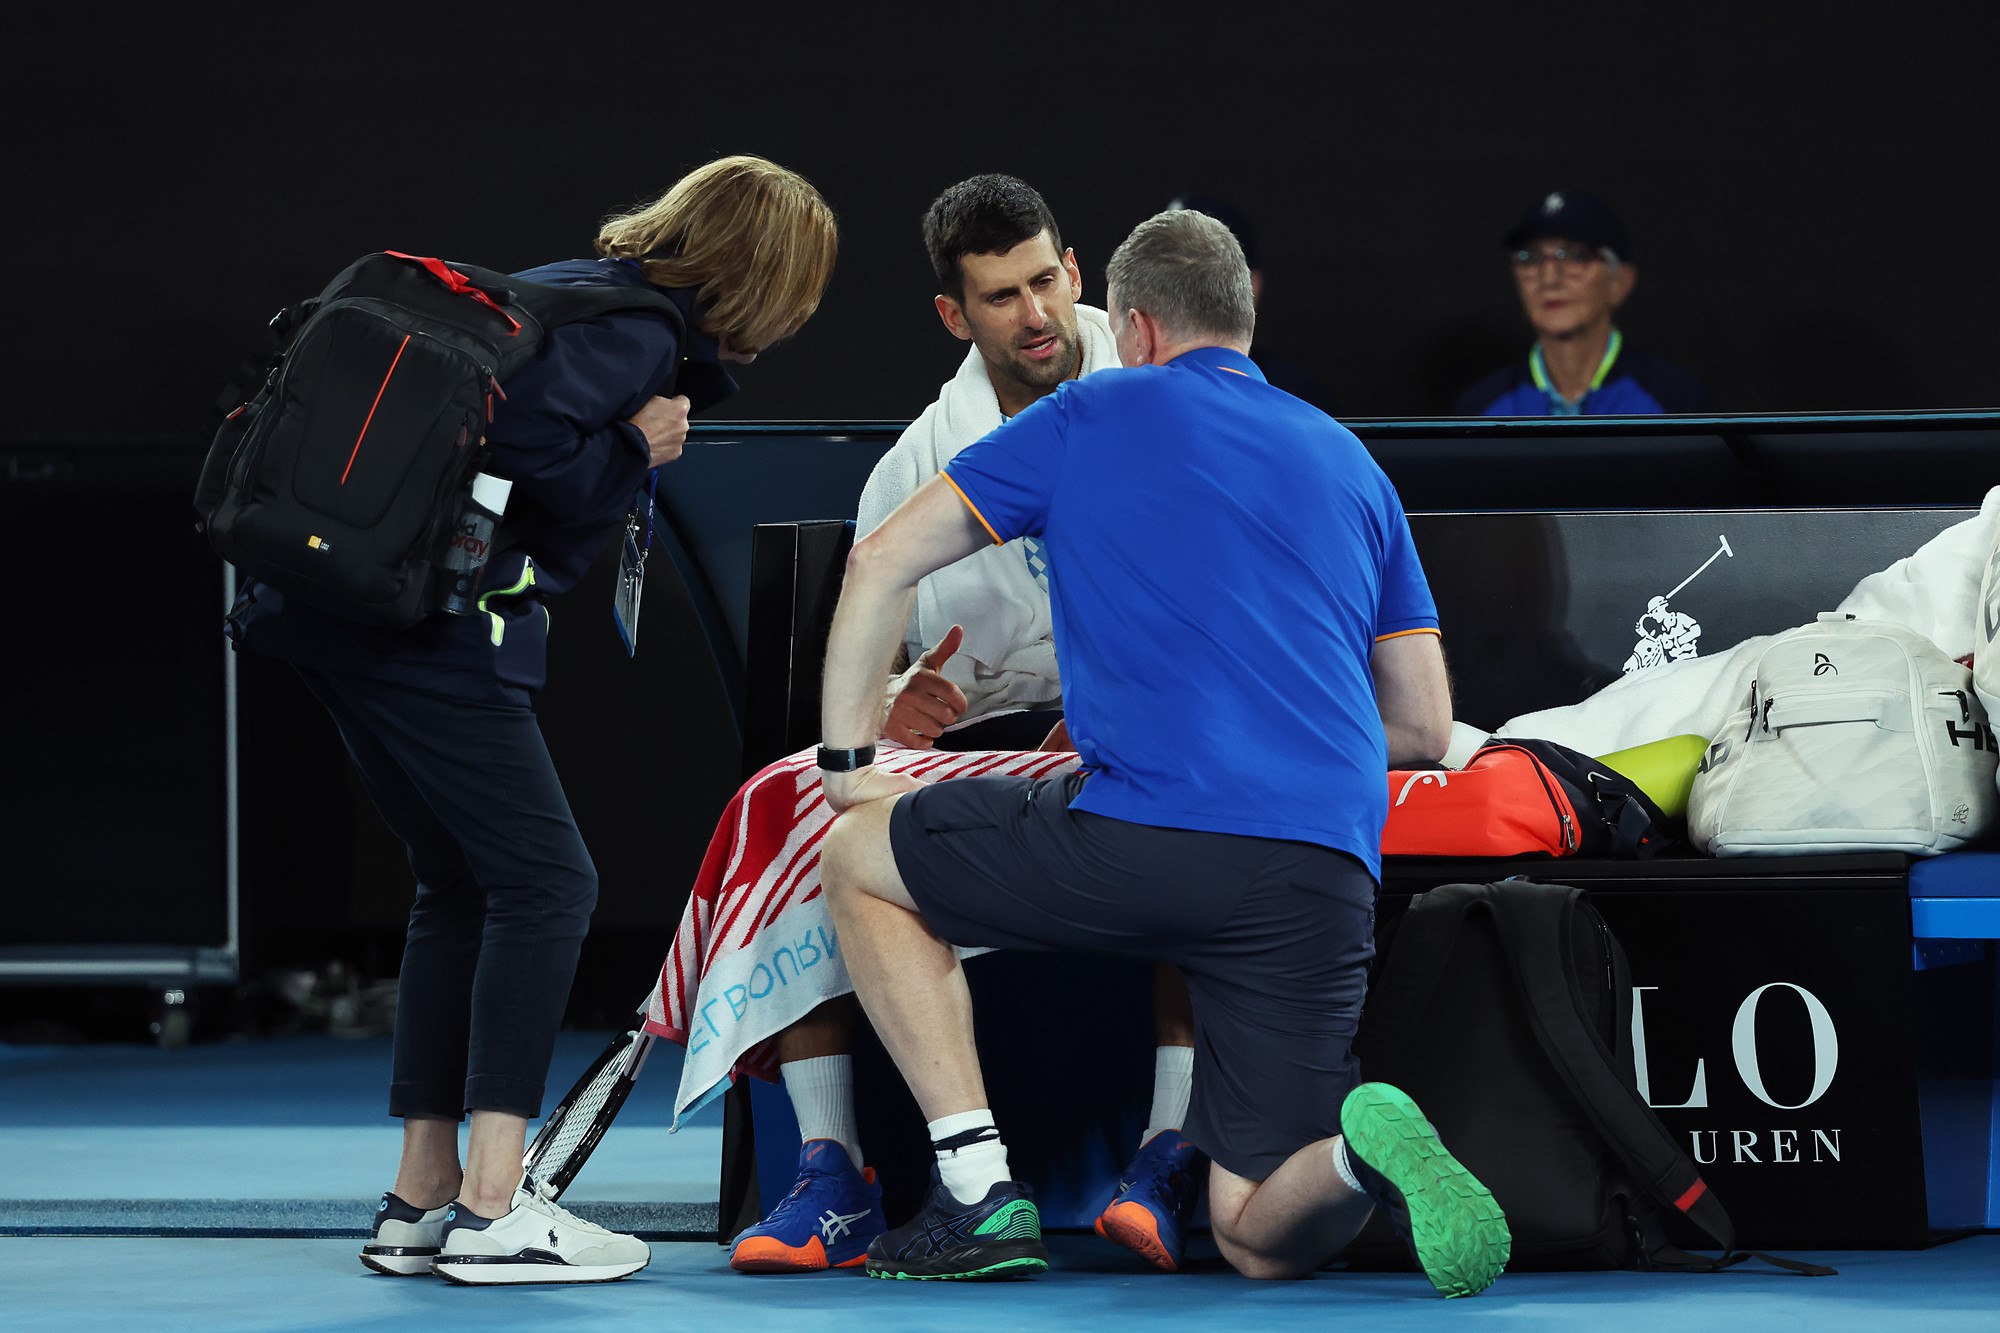 Two physios see to a tennis player.